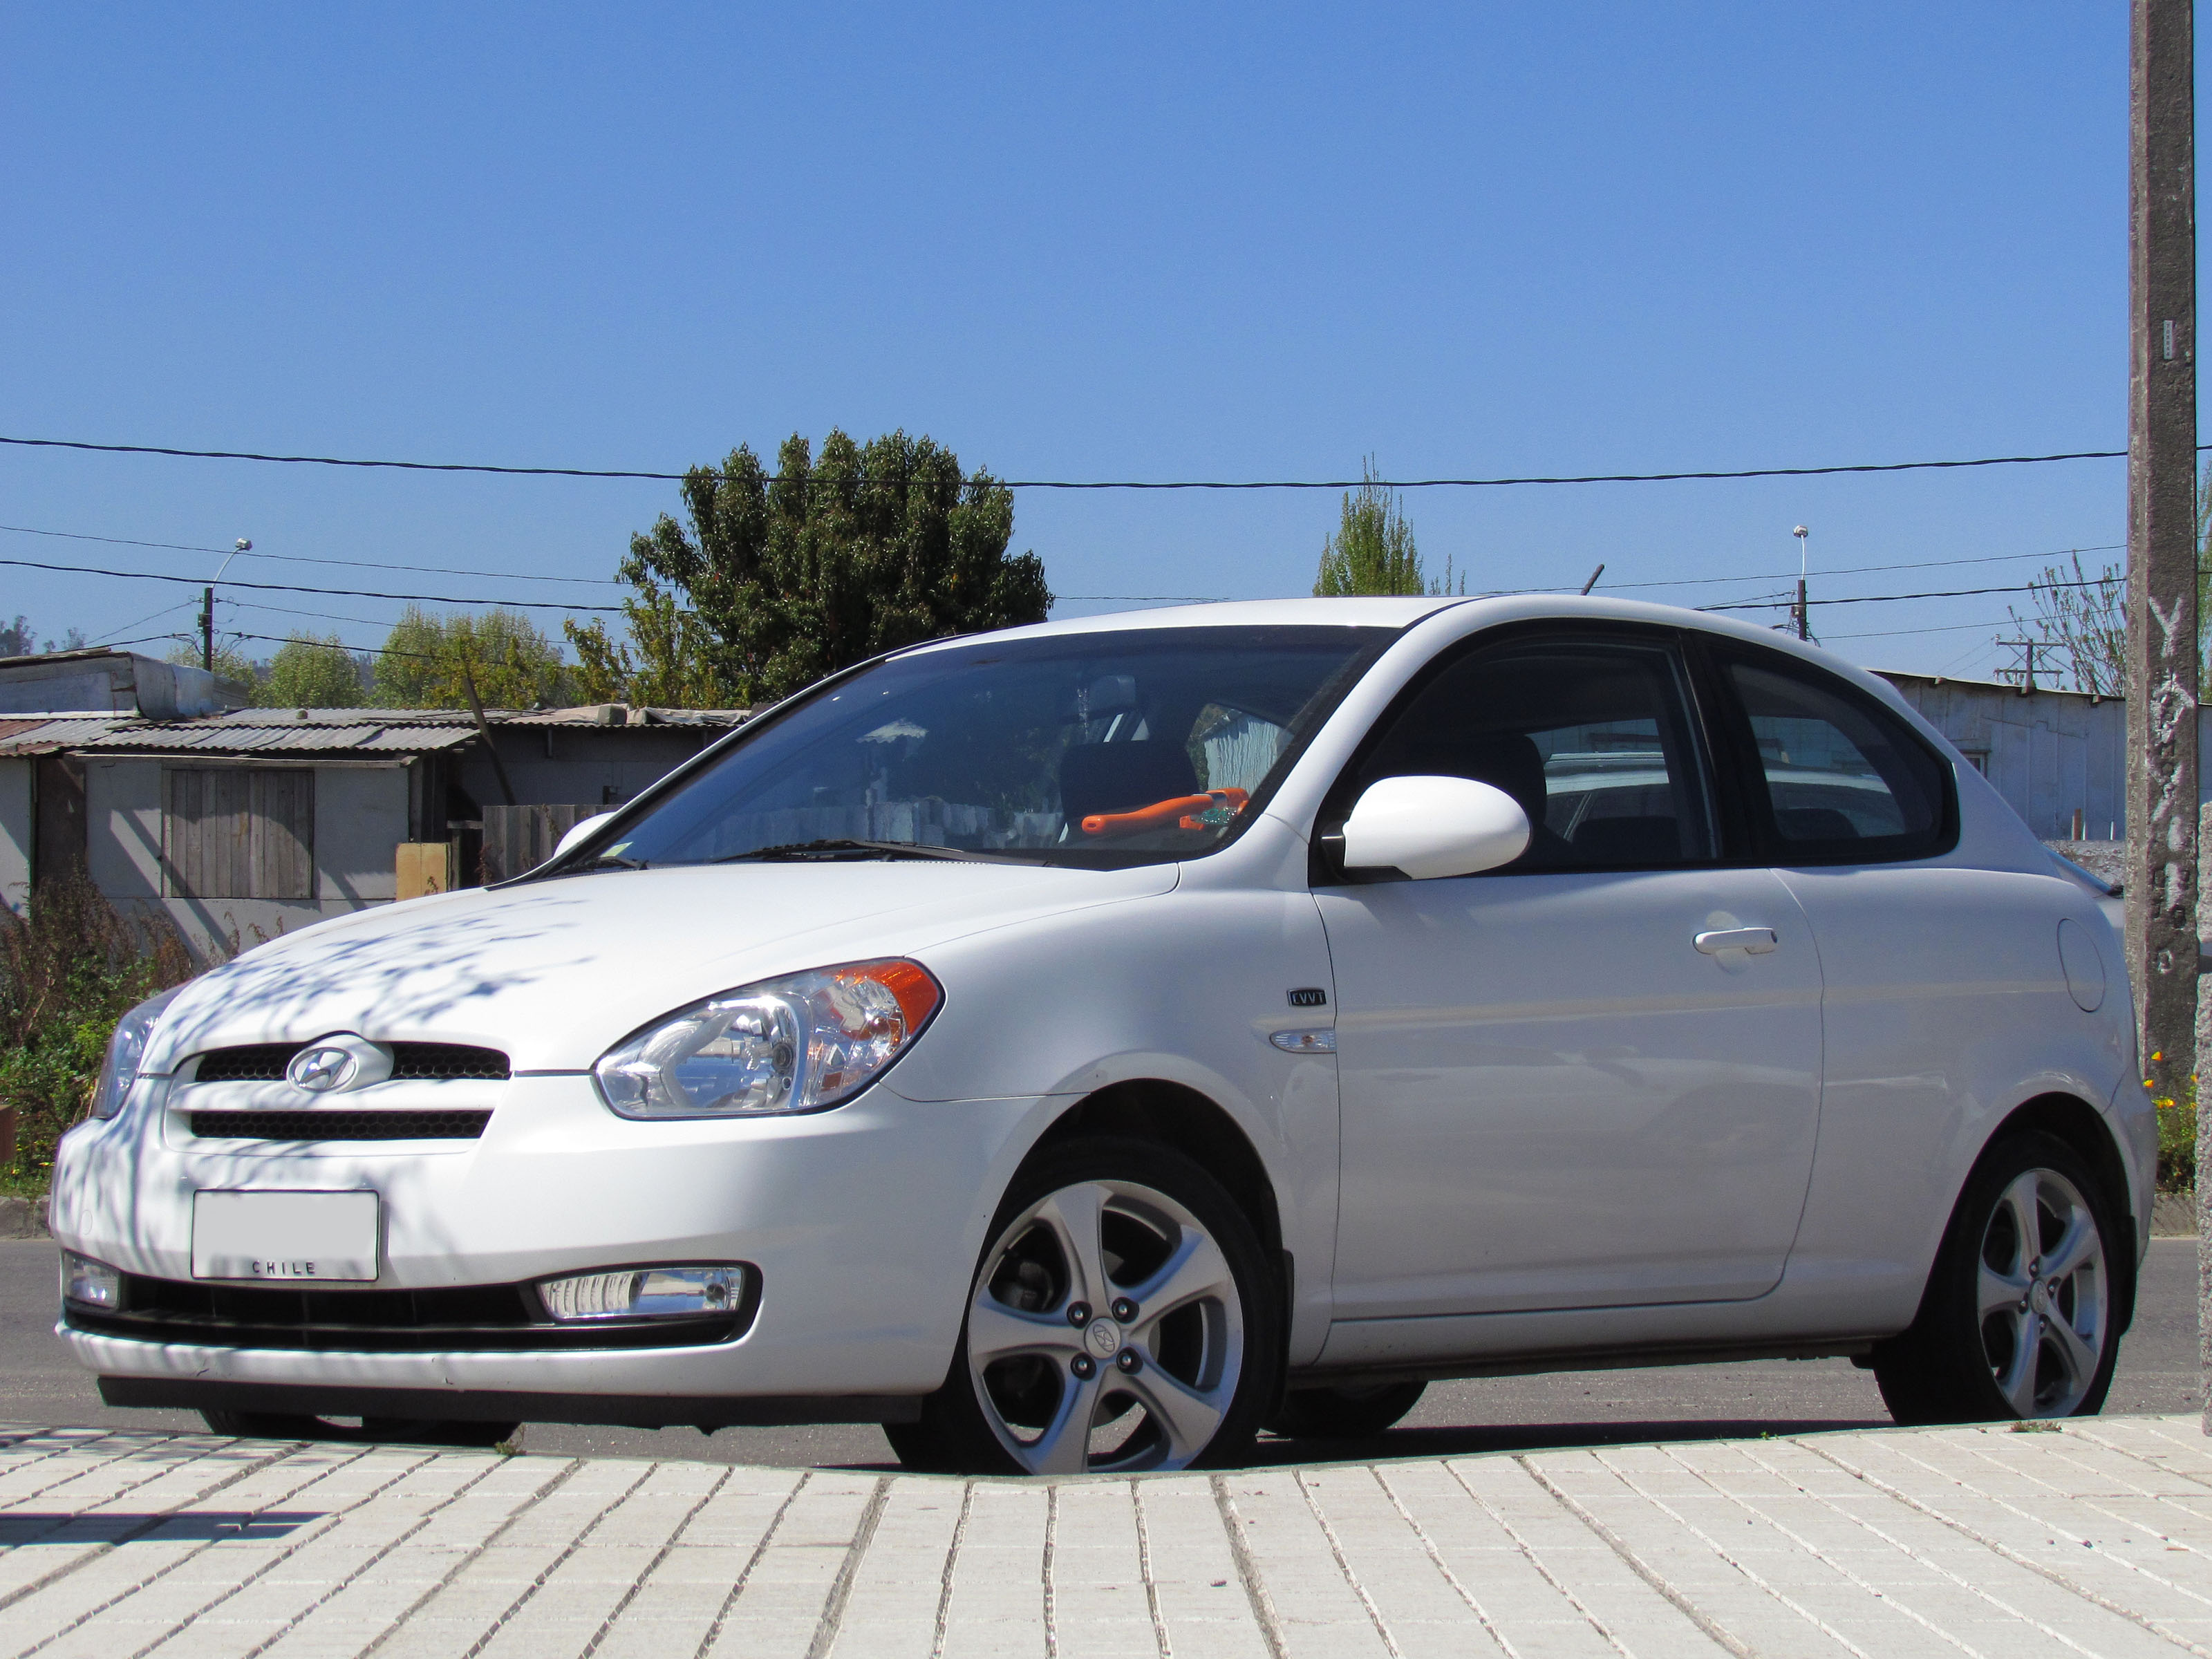 File:Hyundai Accent 1.6 GLS Coupe 2008 (10969354014).jpg - Wikimedia Commons